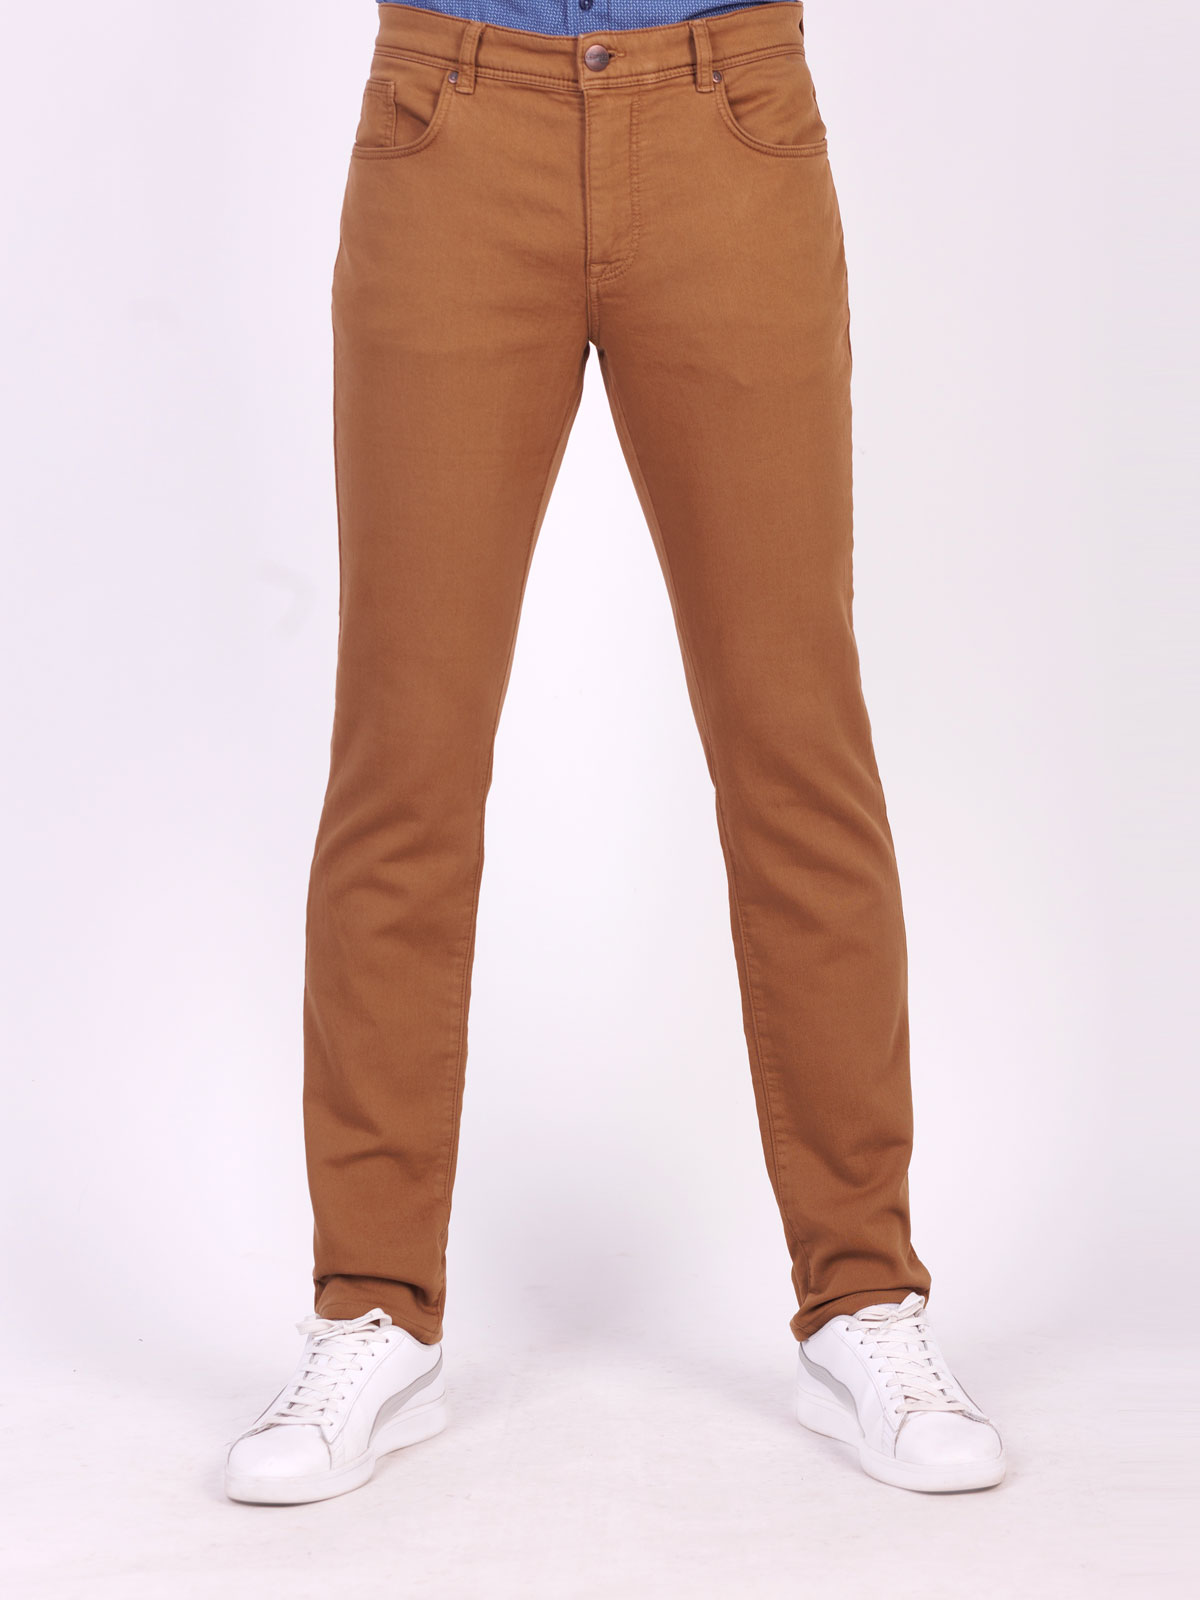 Mens trousers in camel - 60297 € 66.37 img2